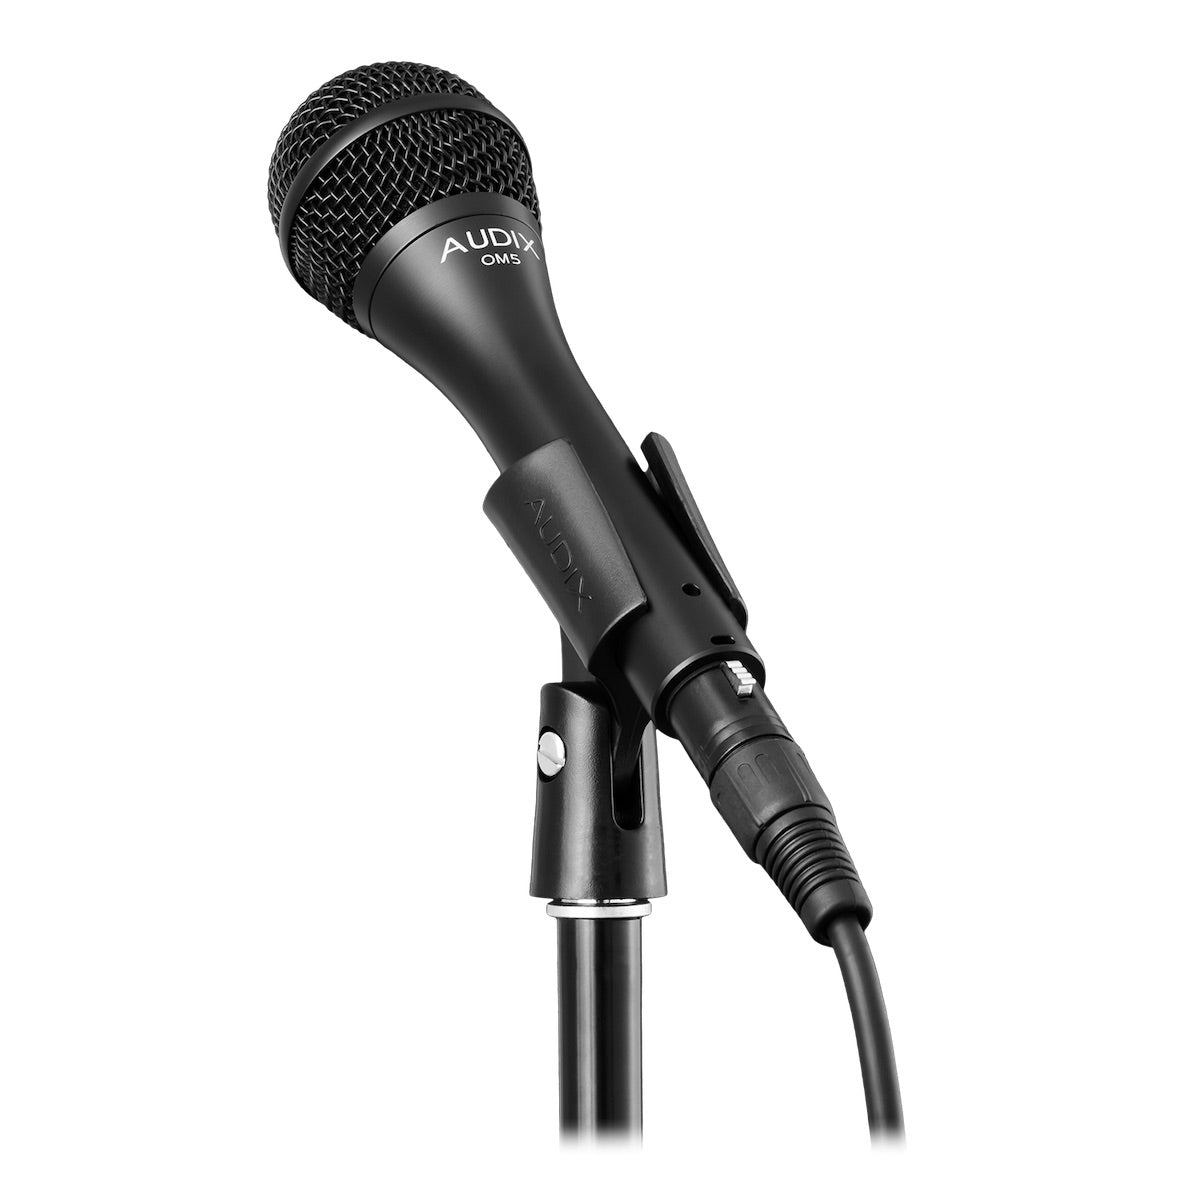 Audix OM5 Dynamic Hypercardioid Vocal Microphone with clip